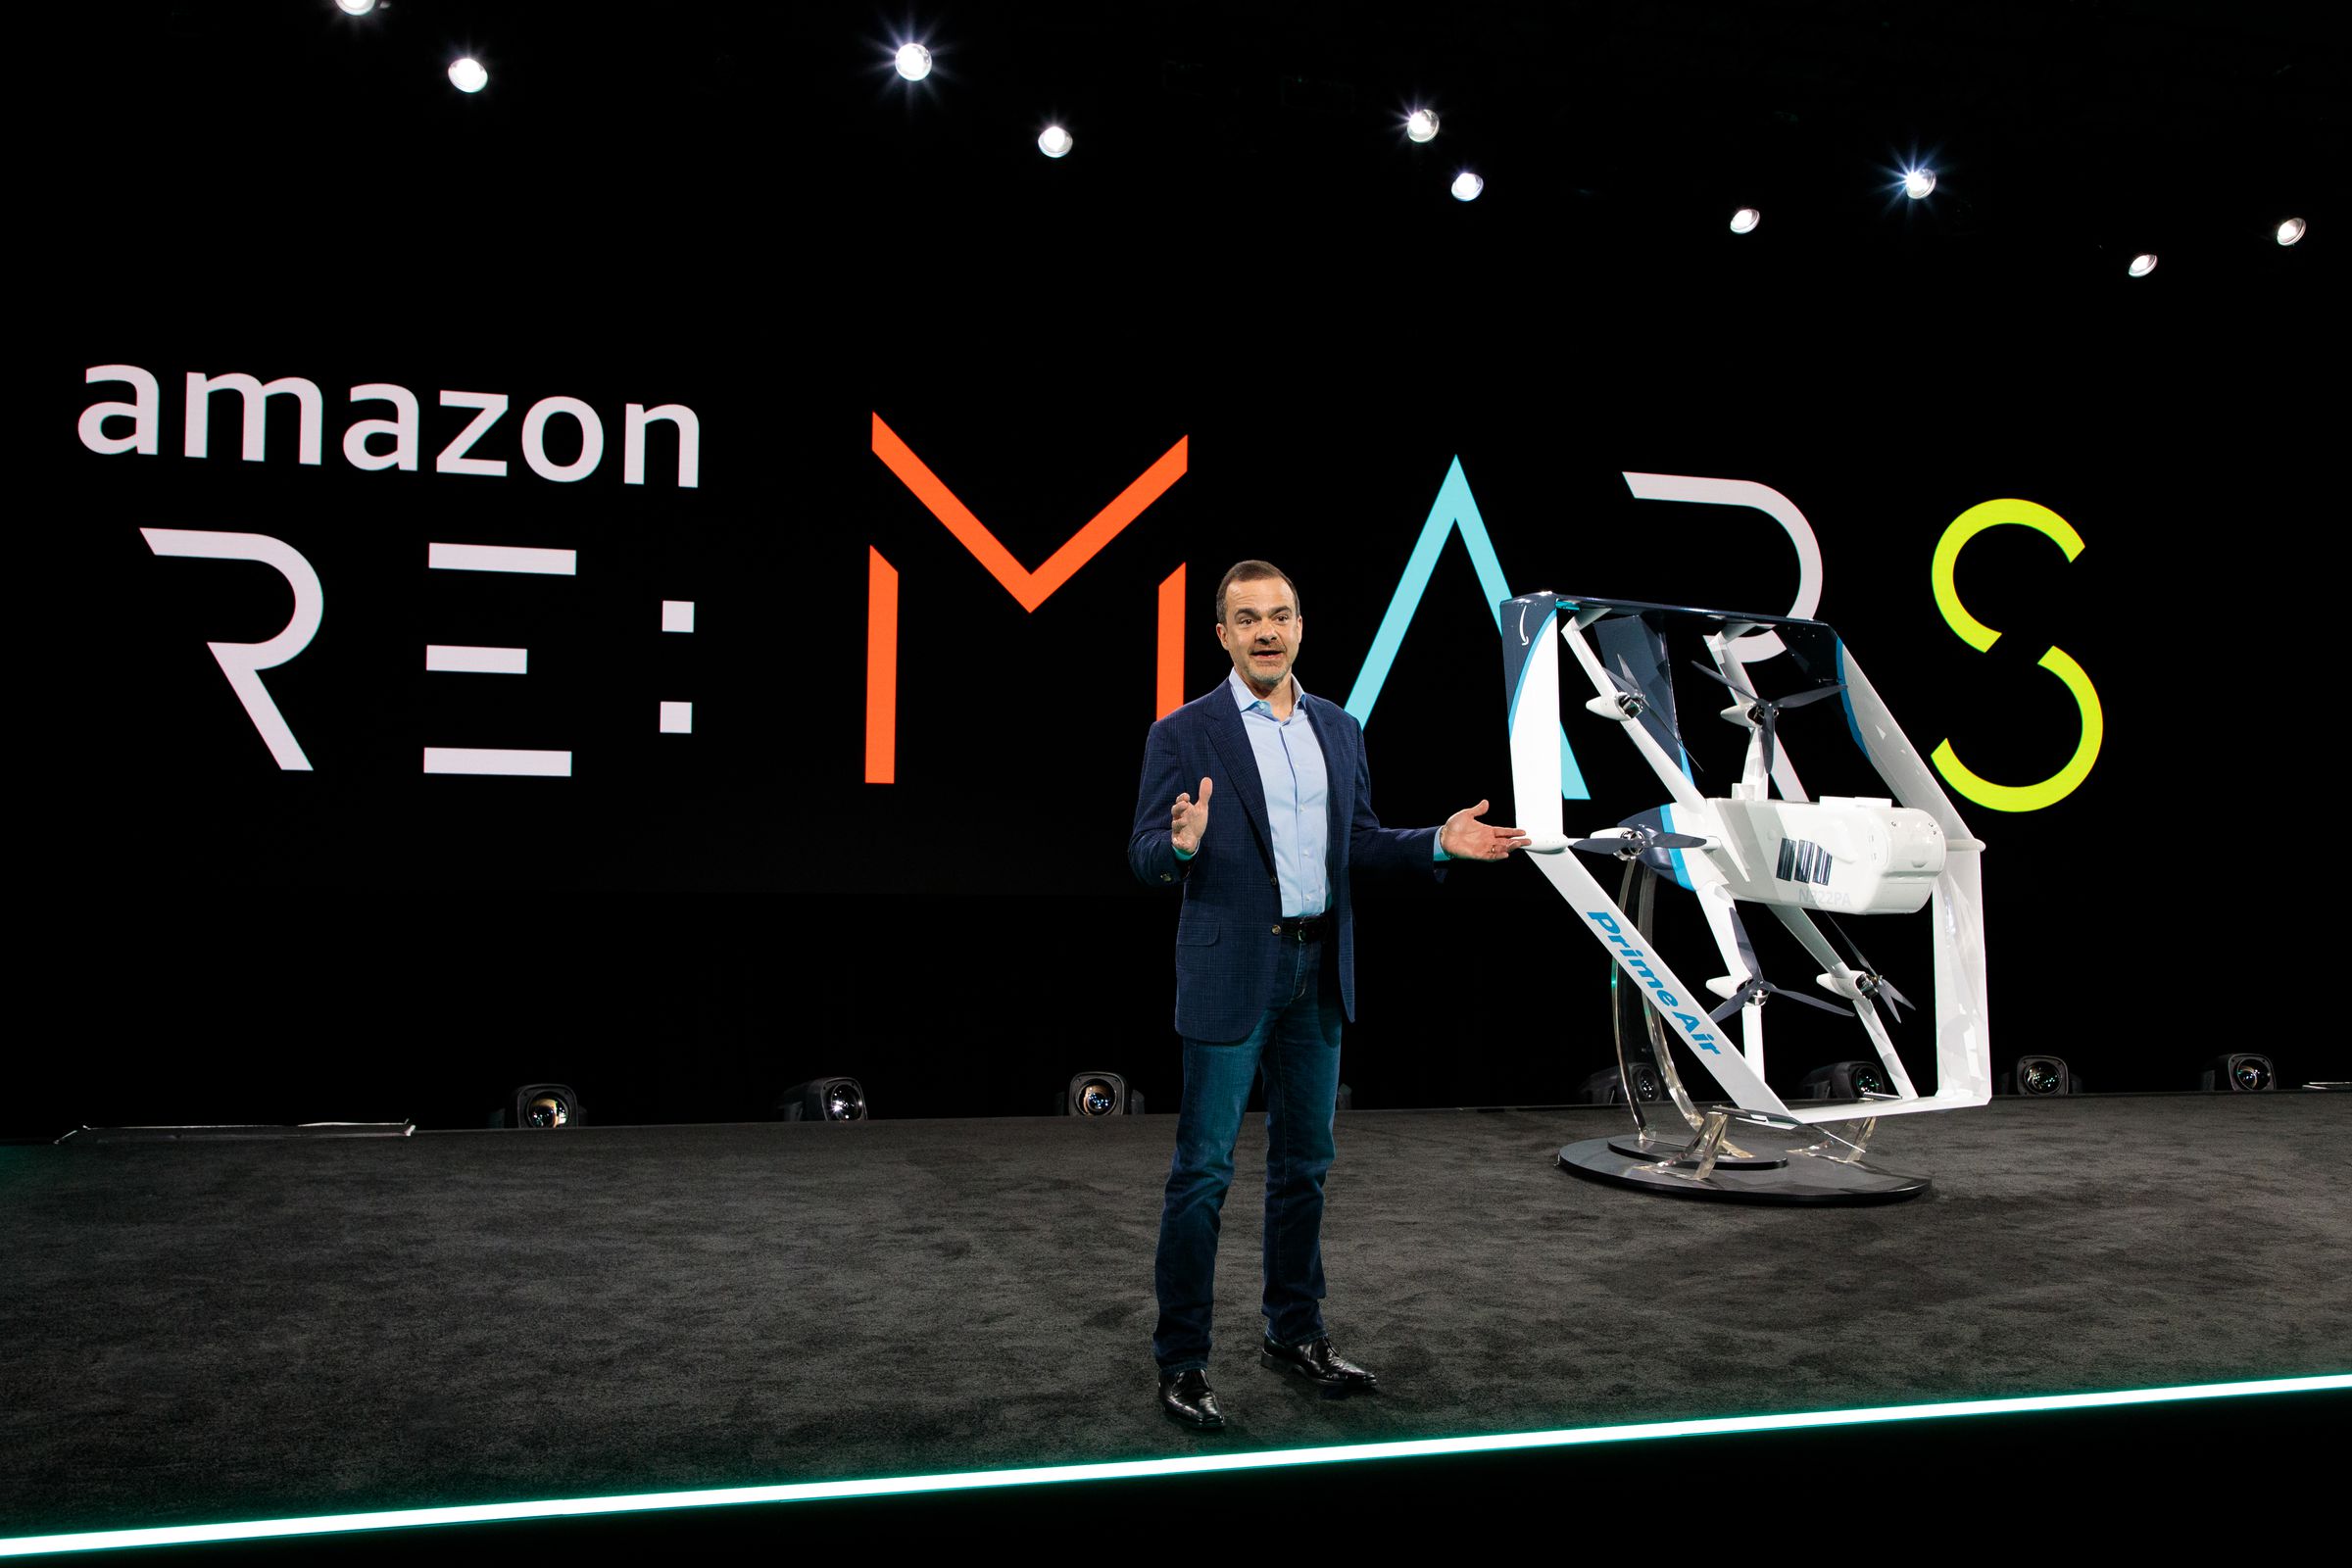 Amazon recently showed off a new version of its delivery drone, which is yet to launch as a commercial service.